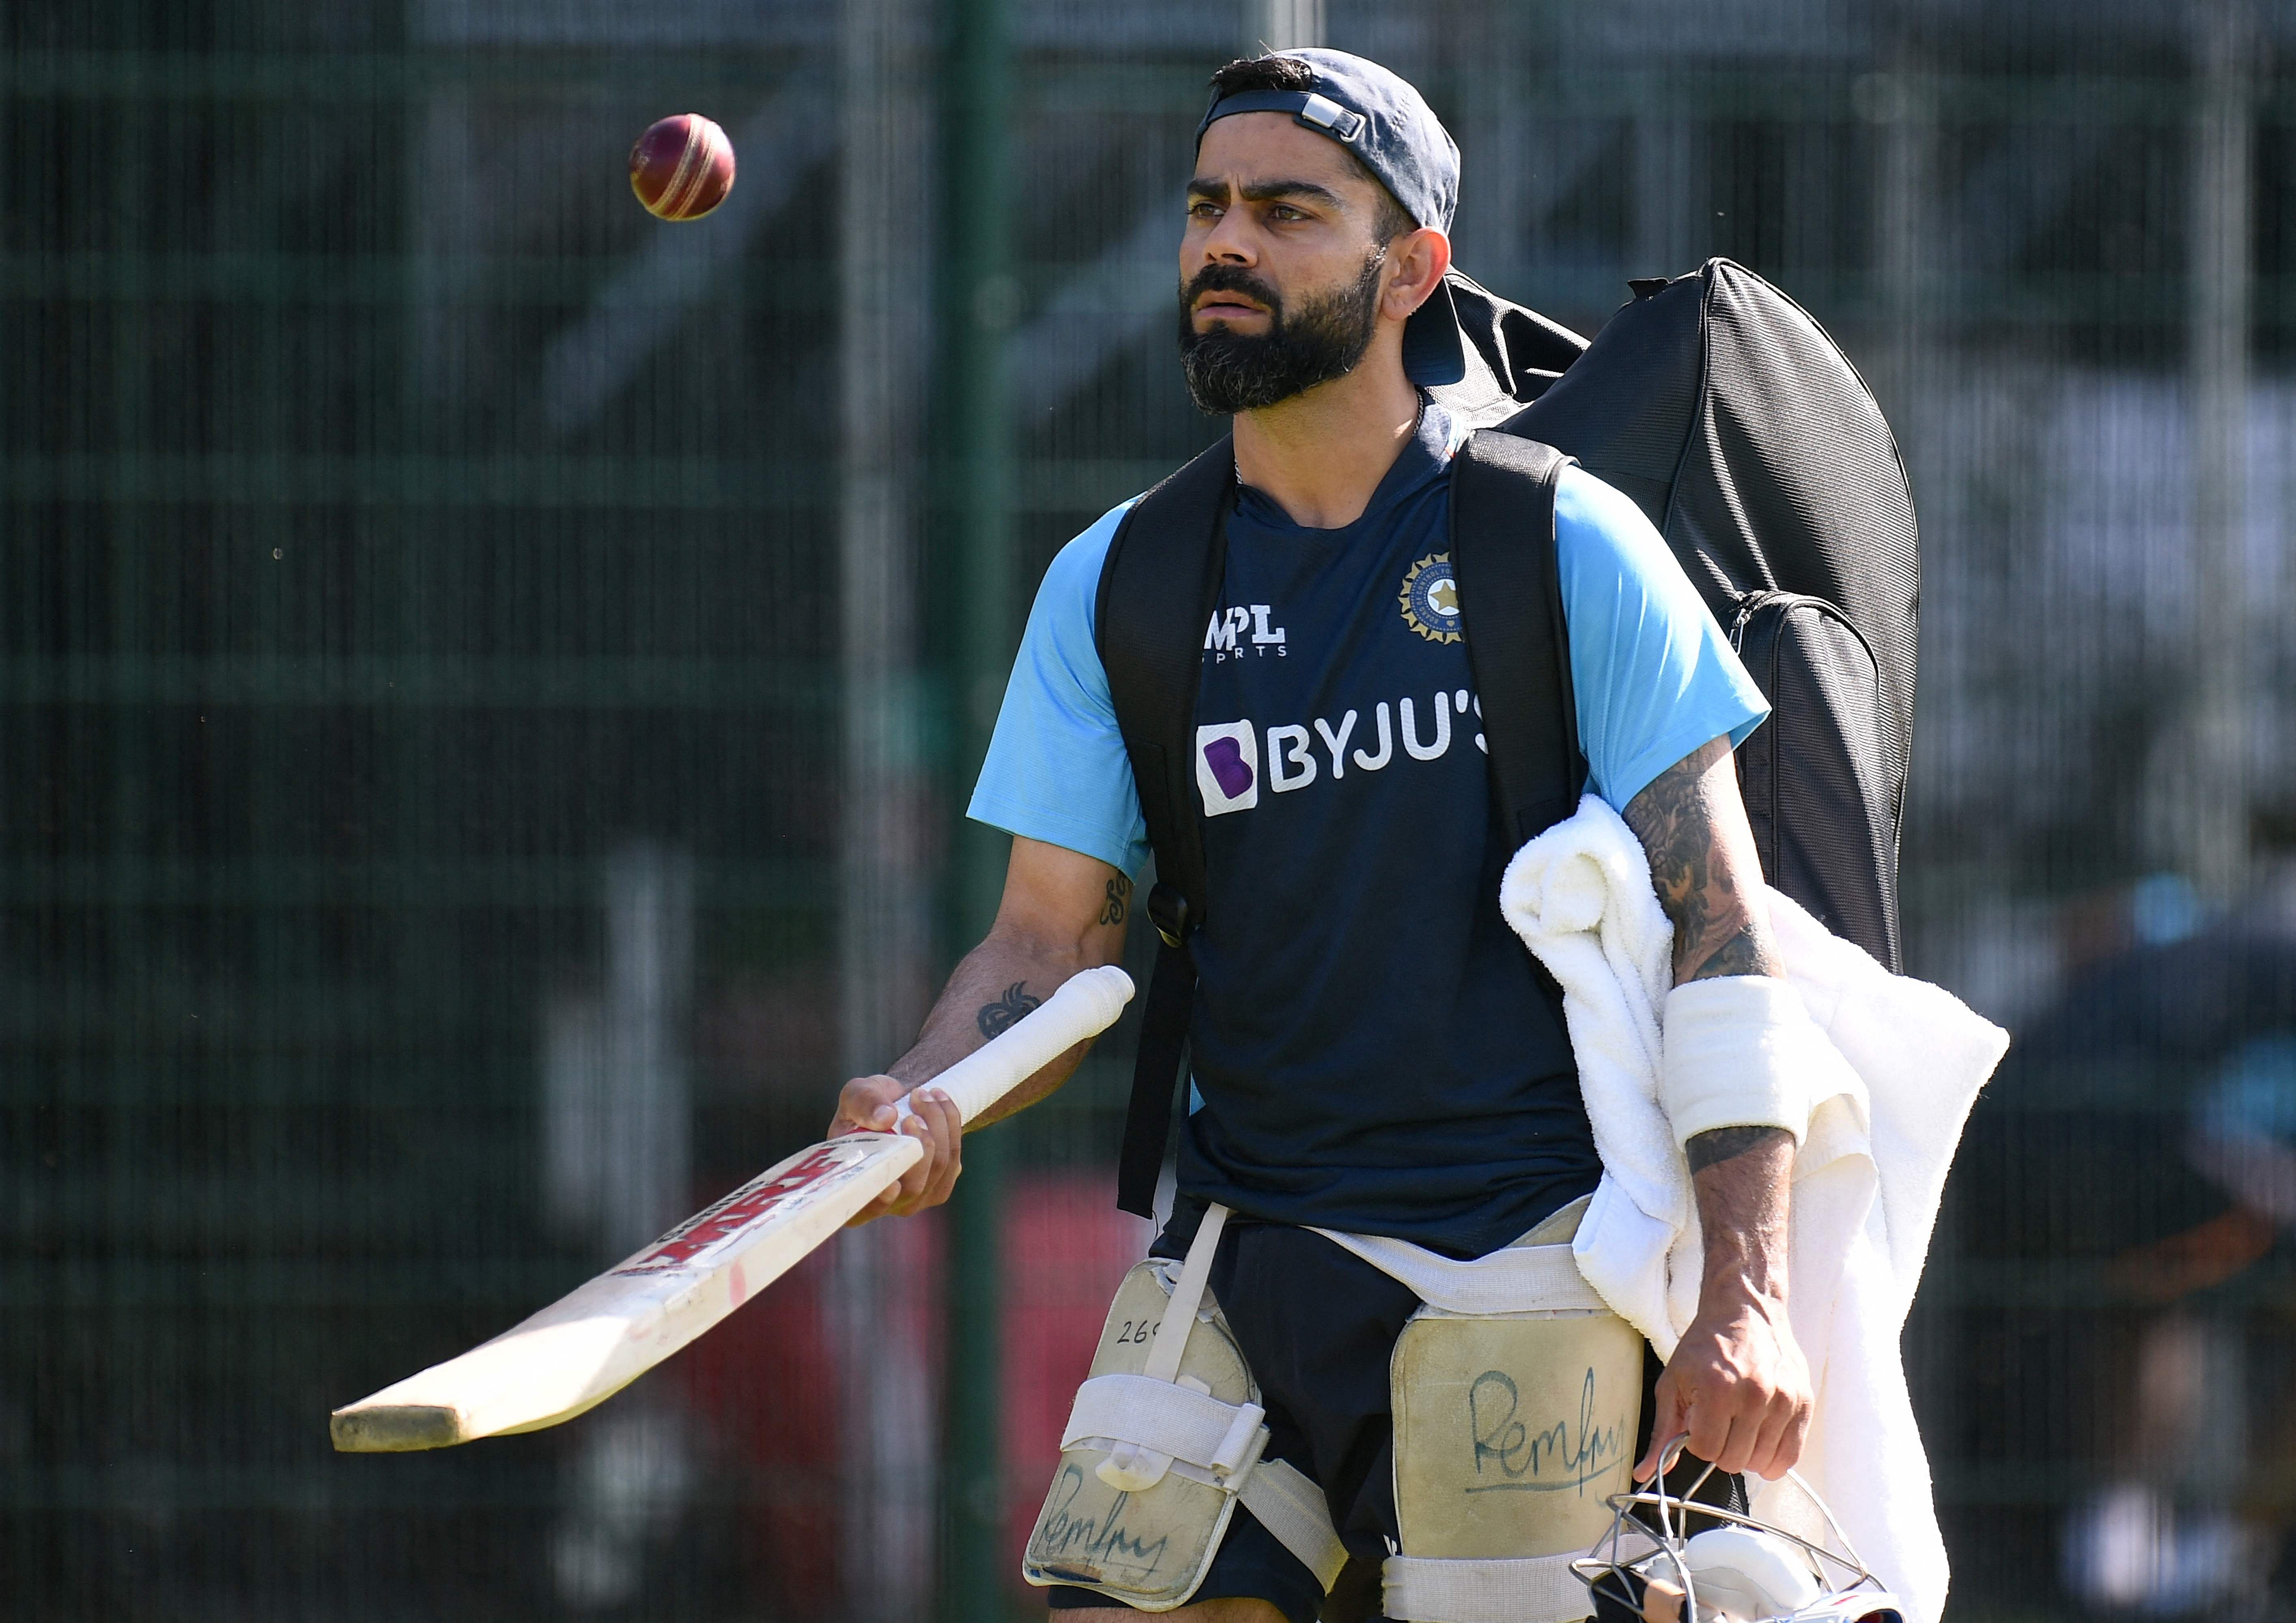 India's captain Virat Kohli bounces a ball on a cricket bat during a team practice session ahead of the fifth cricket Test match between England and India at Old Trafford in Manchester. Credit: AFP Photo